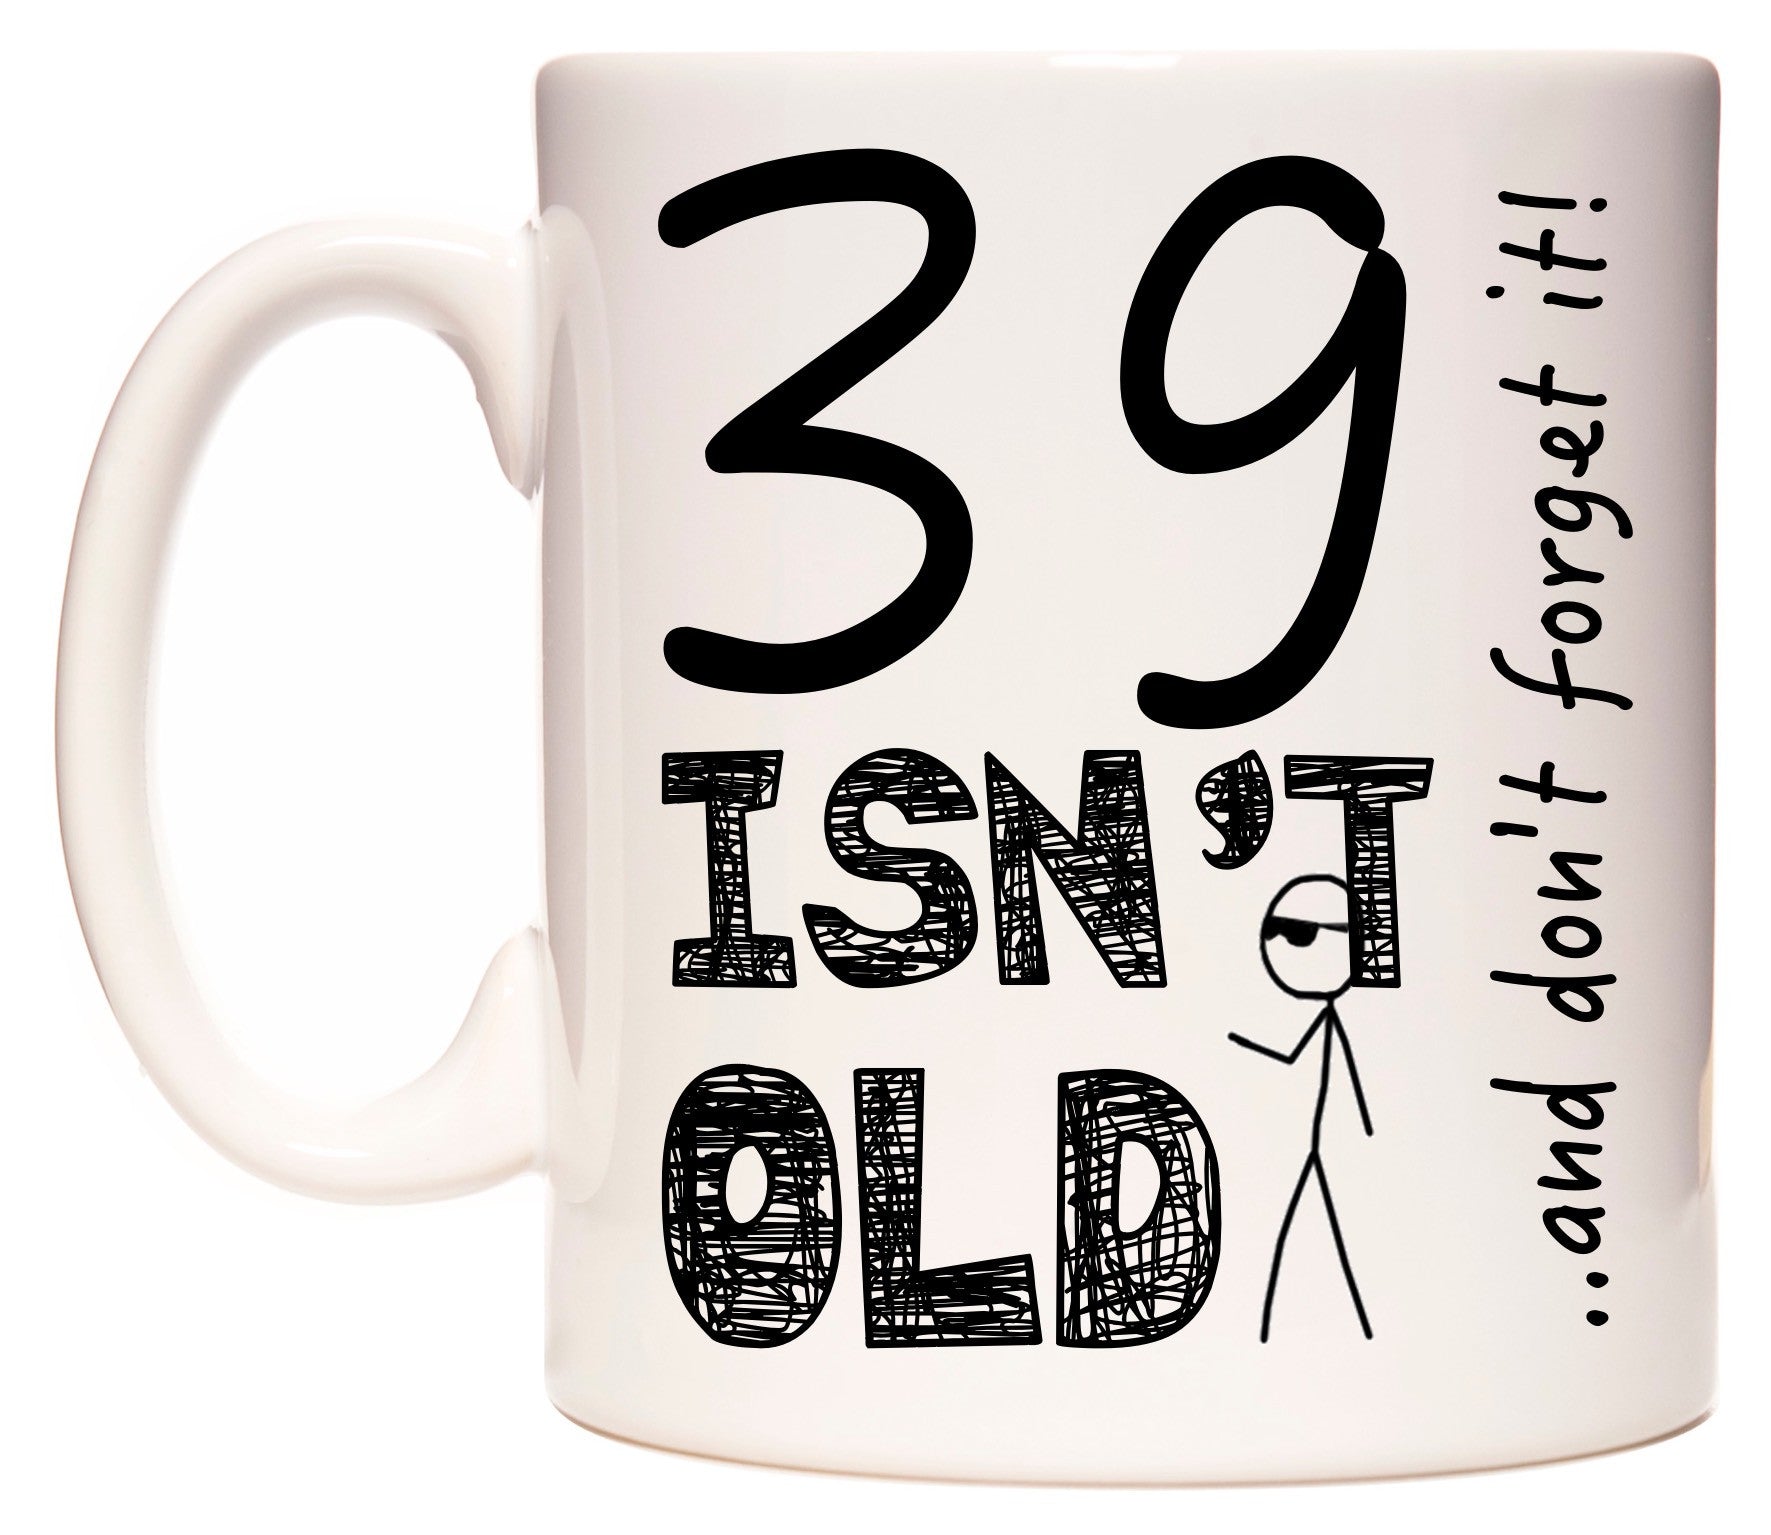 This mug features 39 Isn't Old